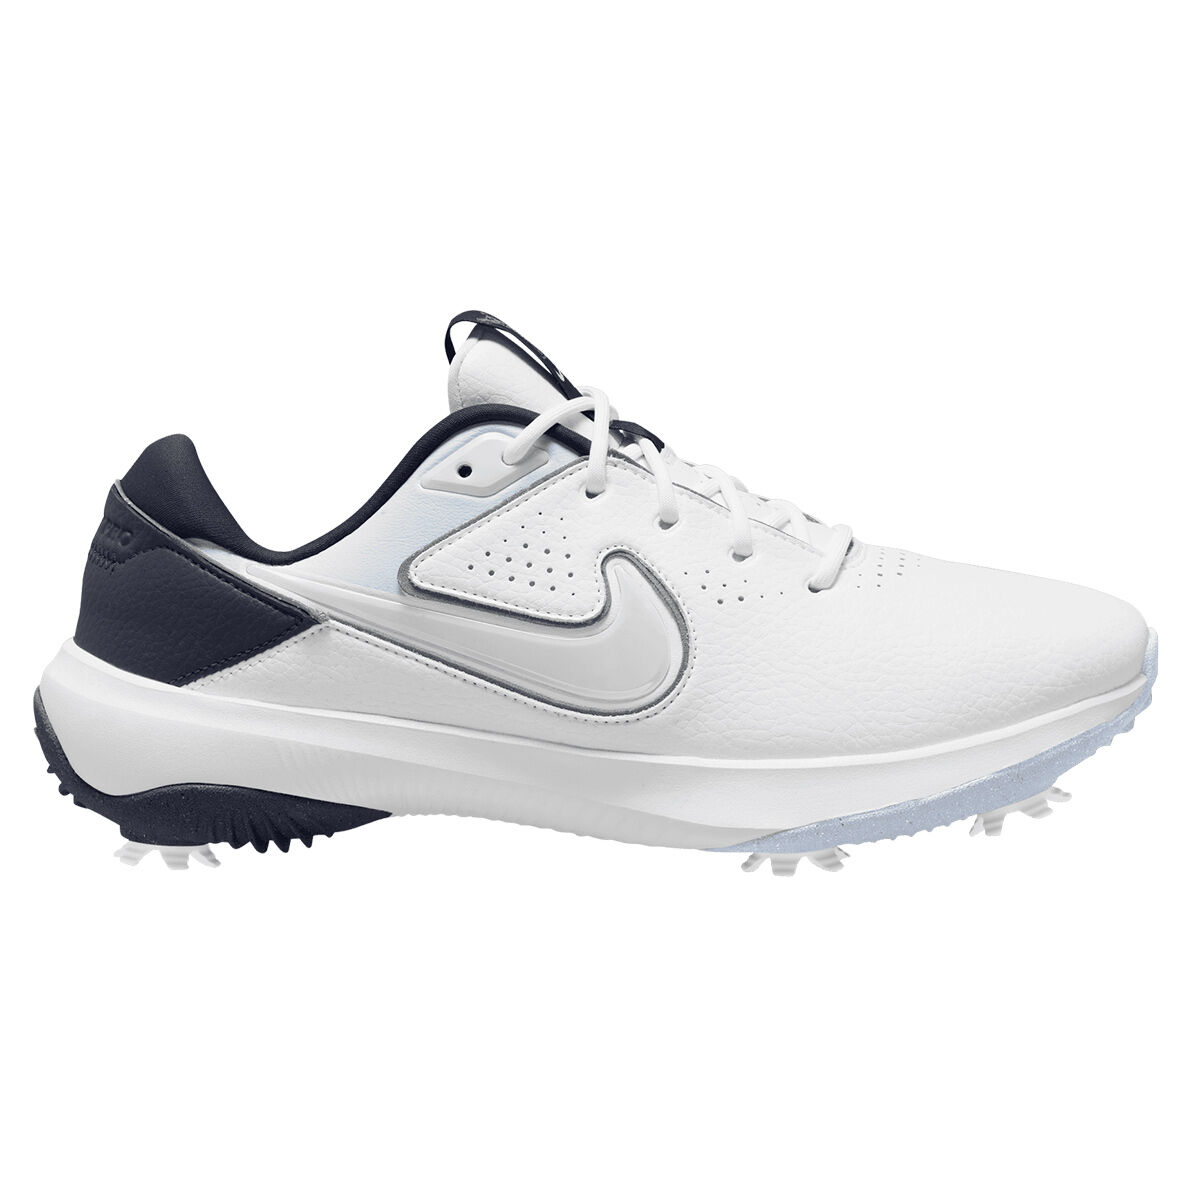 Nike Men’s Victory Pro 3 Waterproof Spiked Golf Shoes, Mens, White/football grey/obsidian, 9 | American Golf